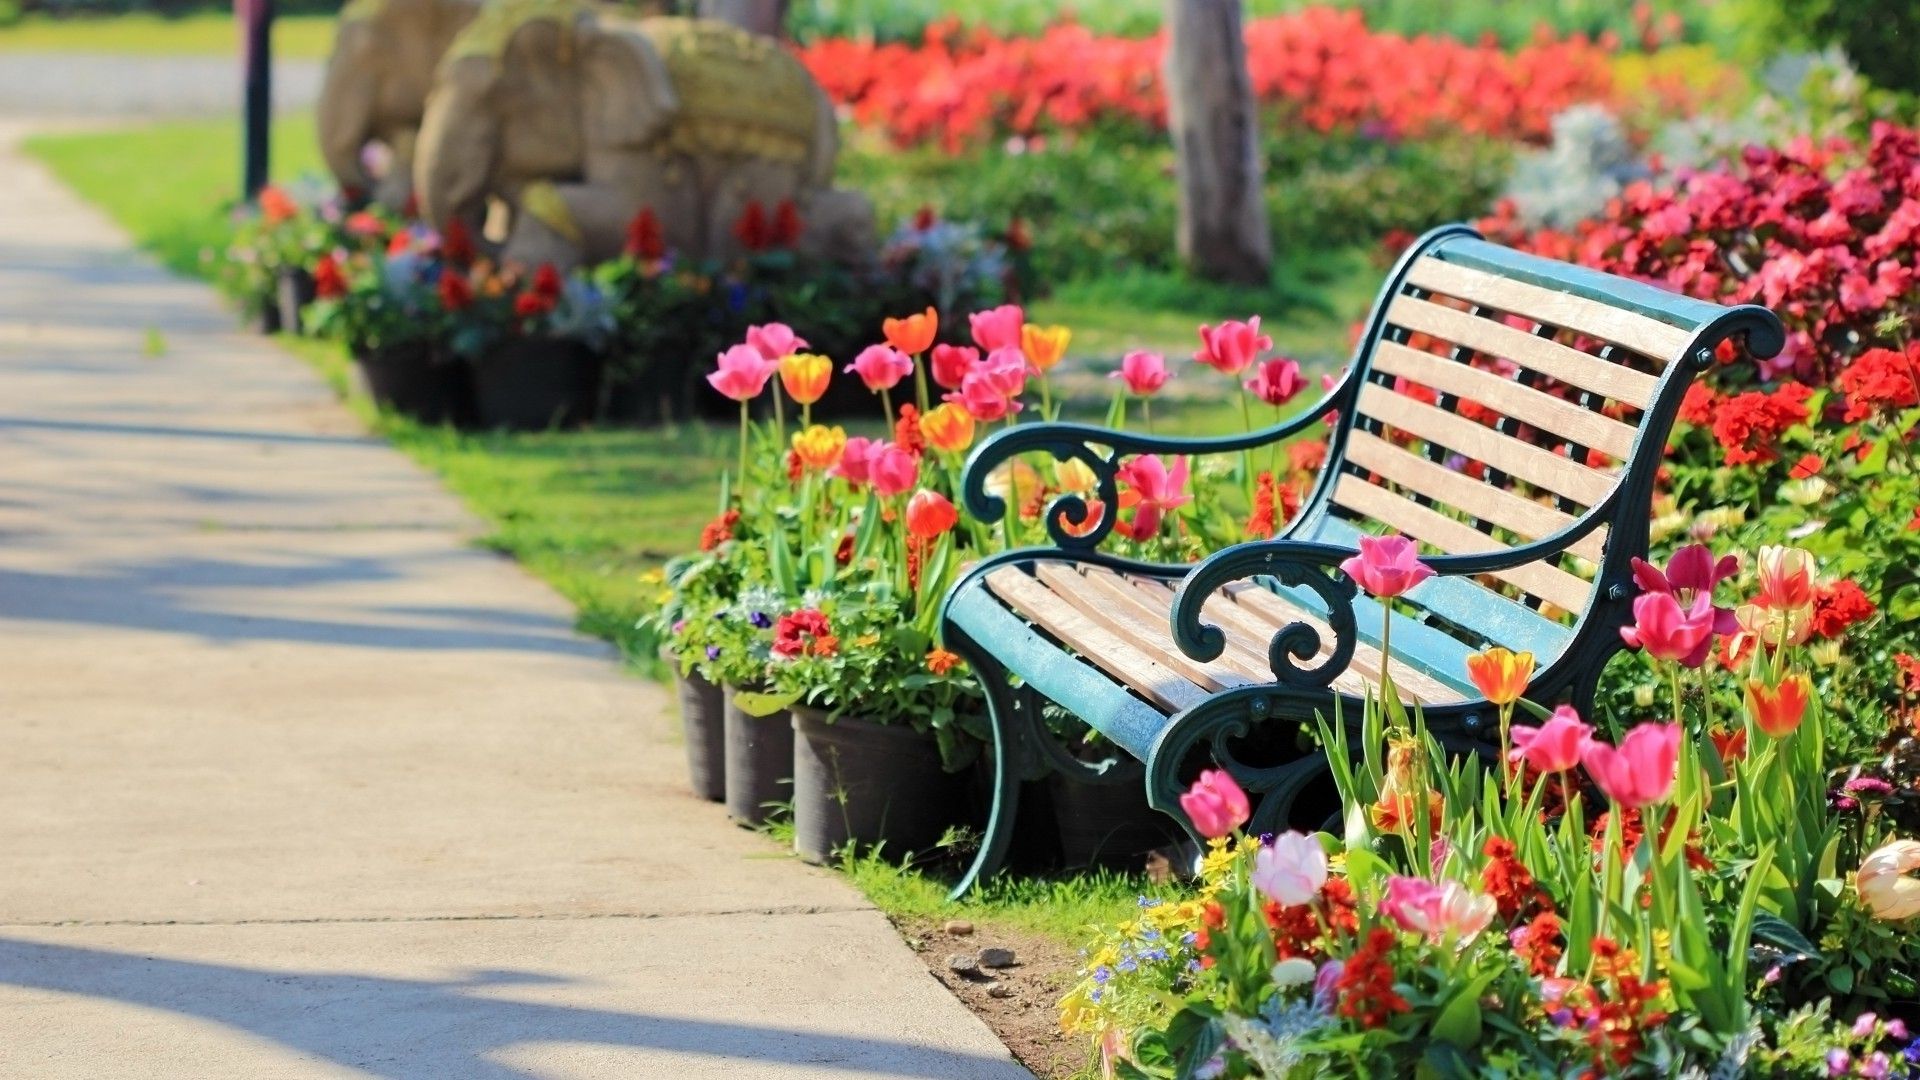 Bench in the Park among the flowers